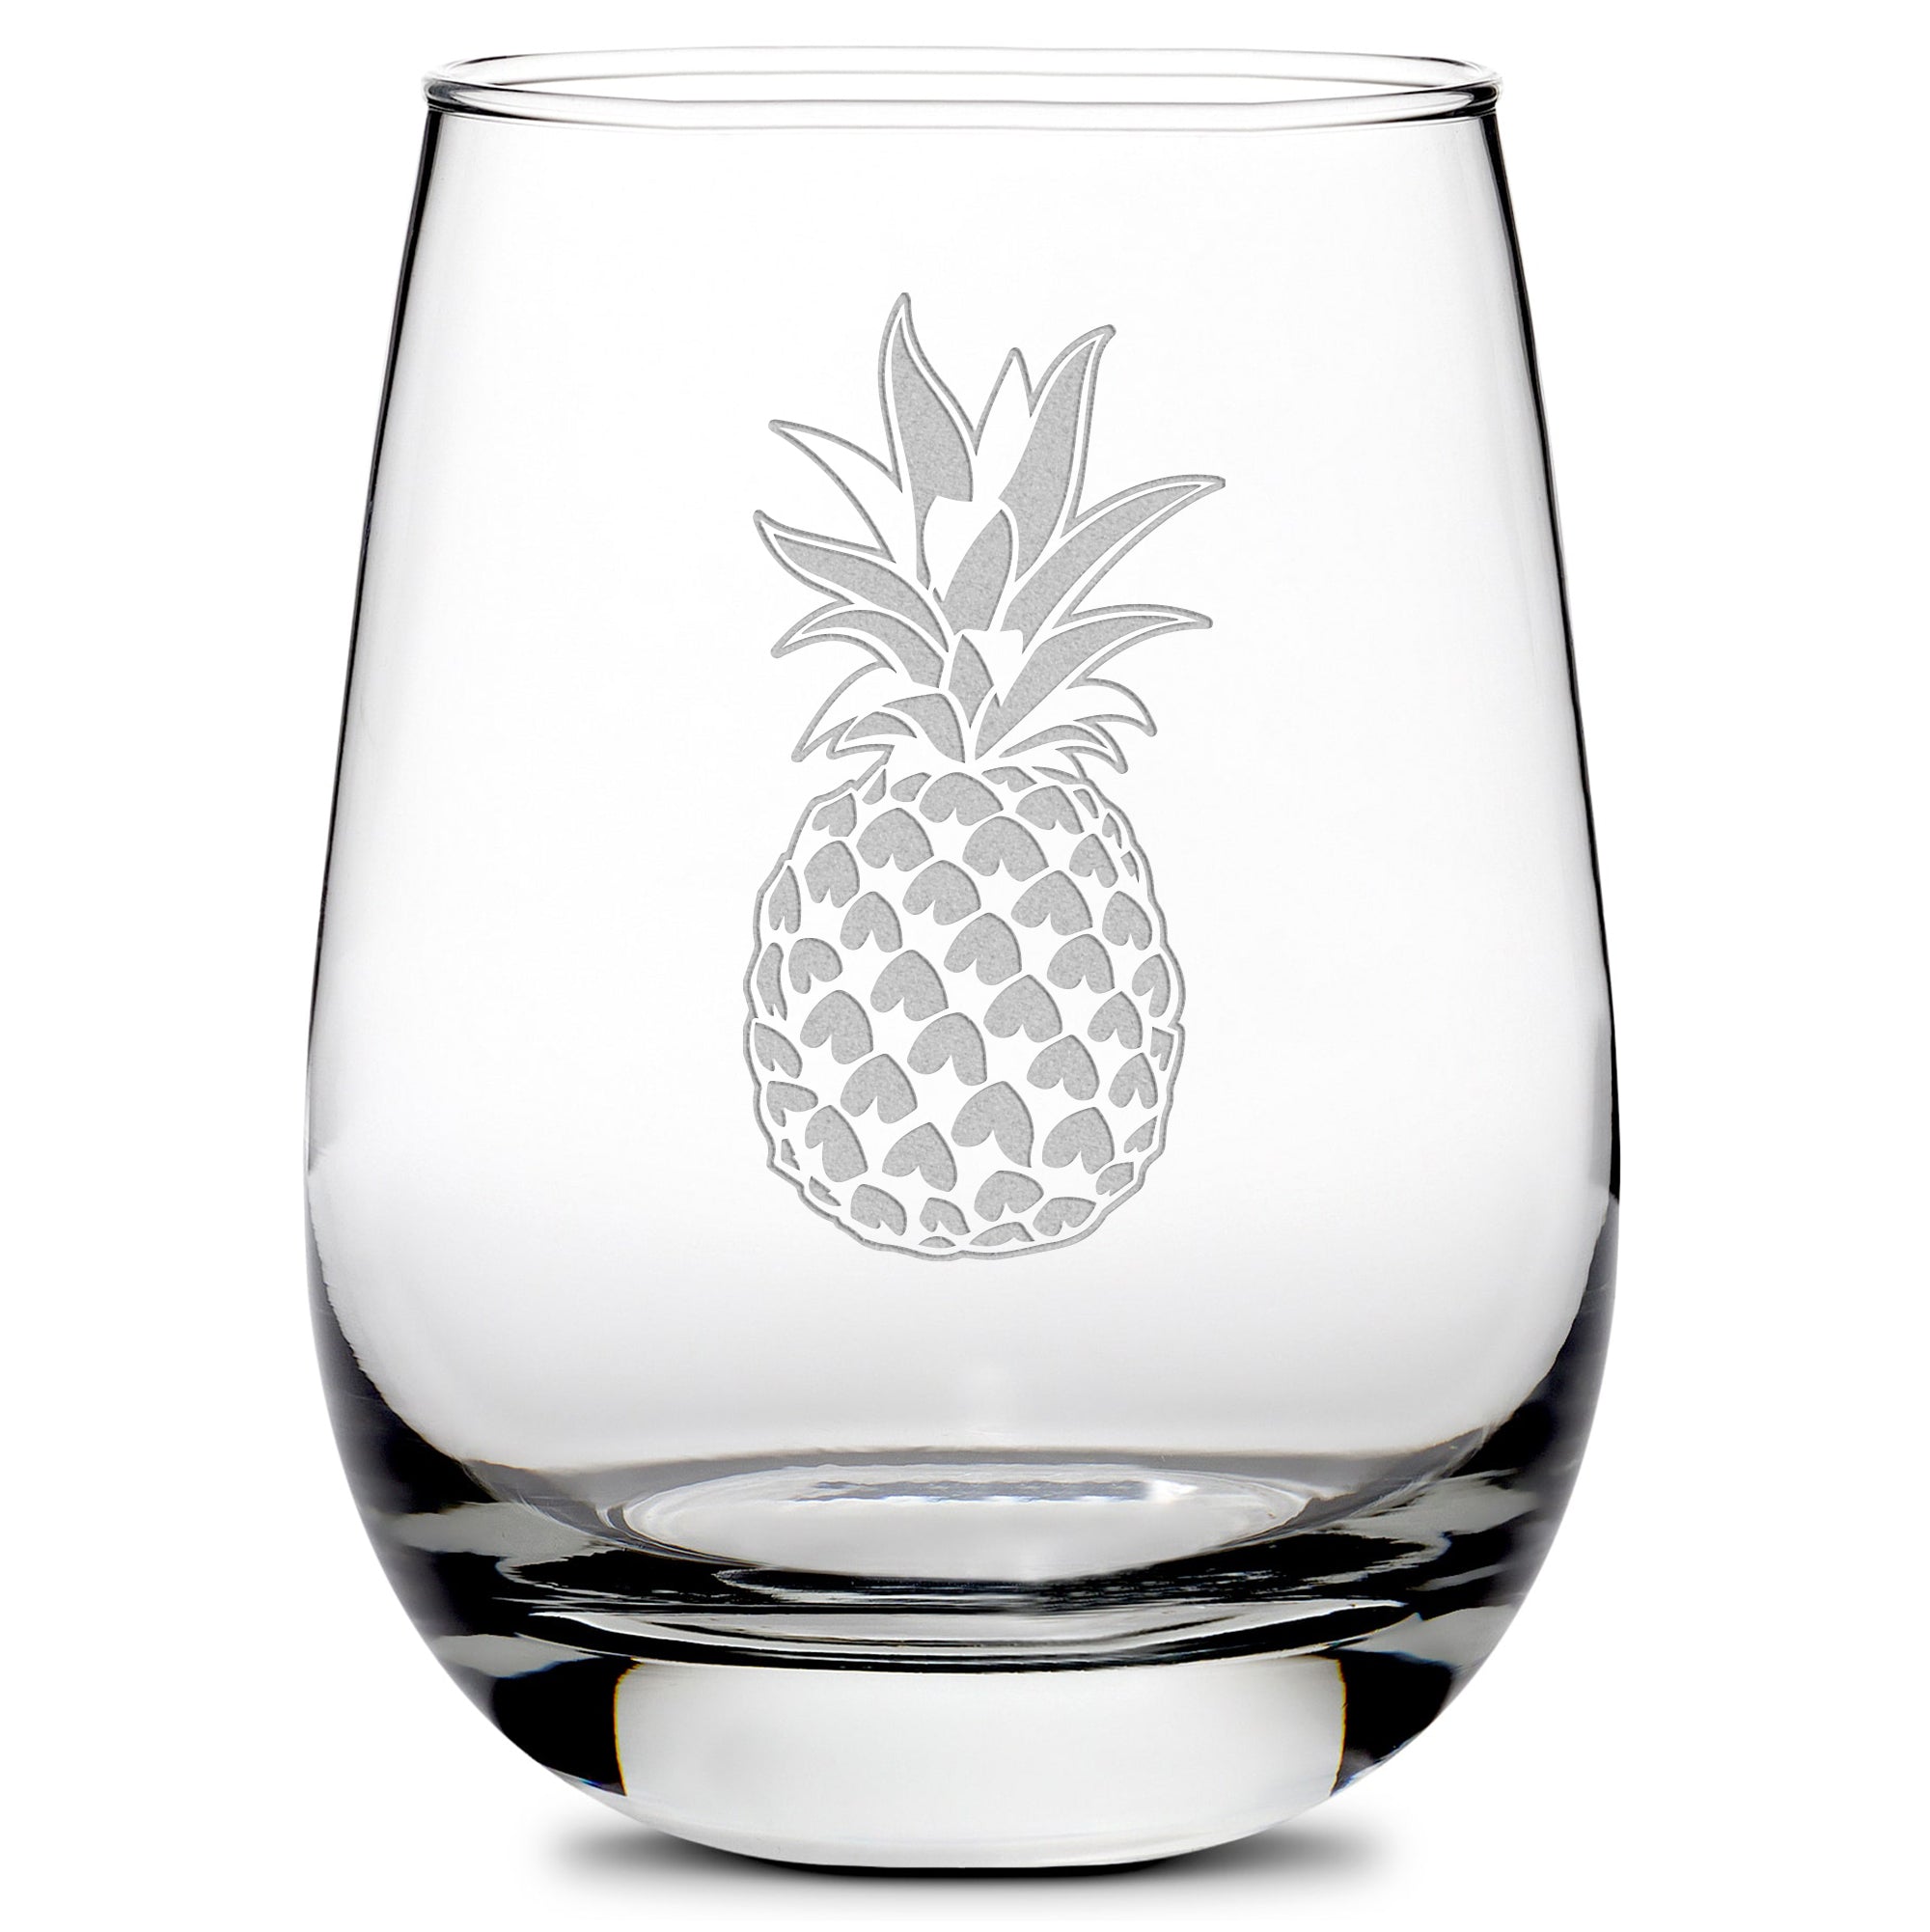 Premium Wine Glass, Pineapple Design, 16oz, Laser Etched or Hand Etched